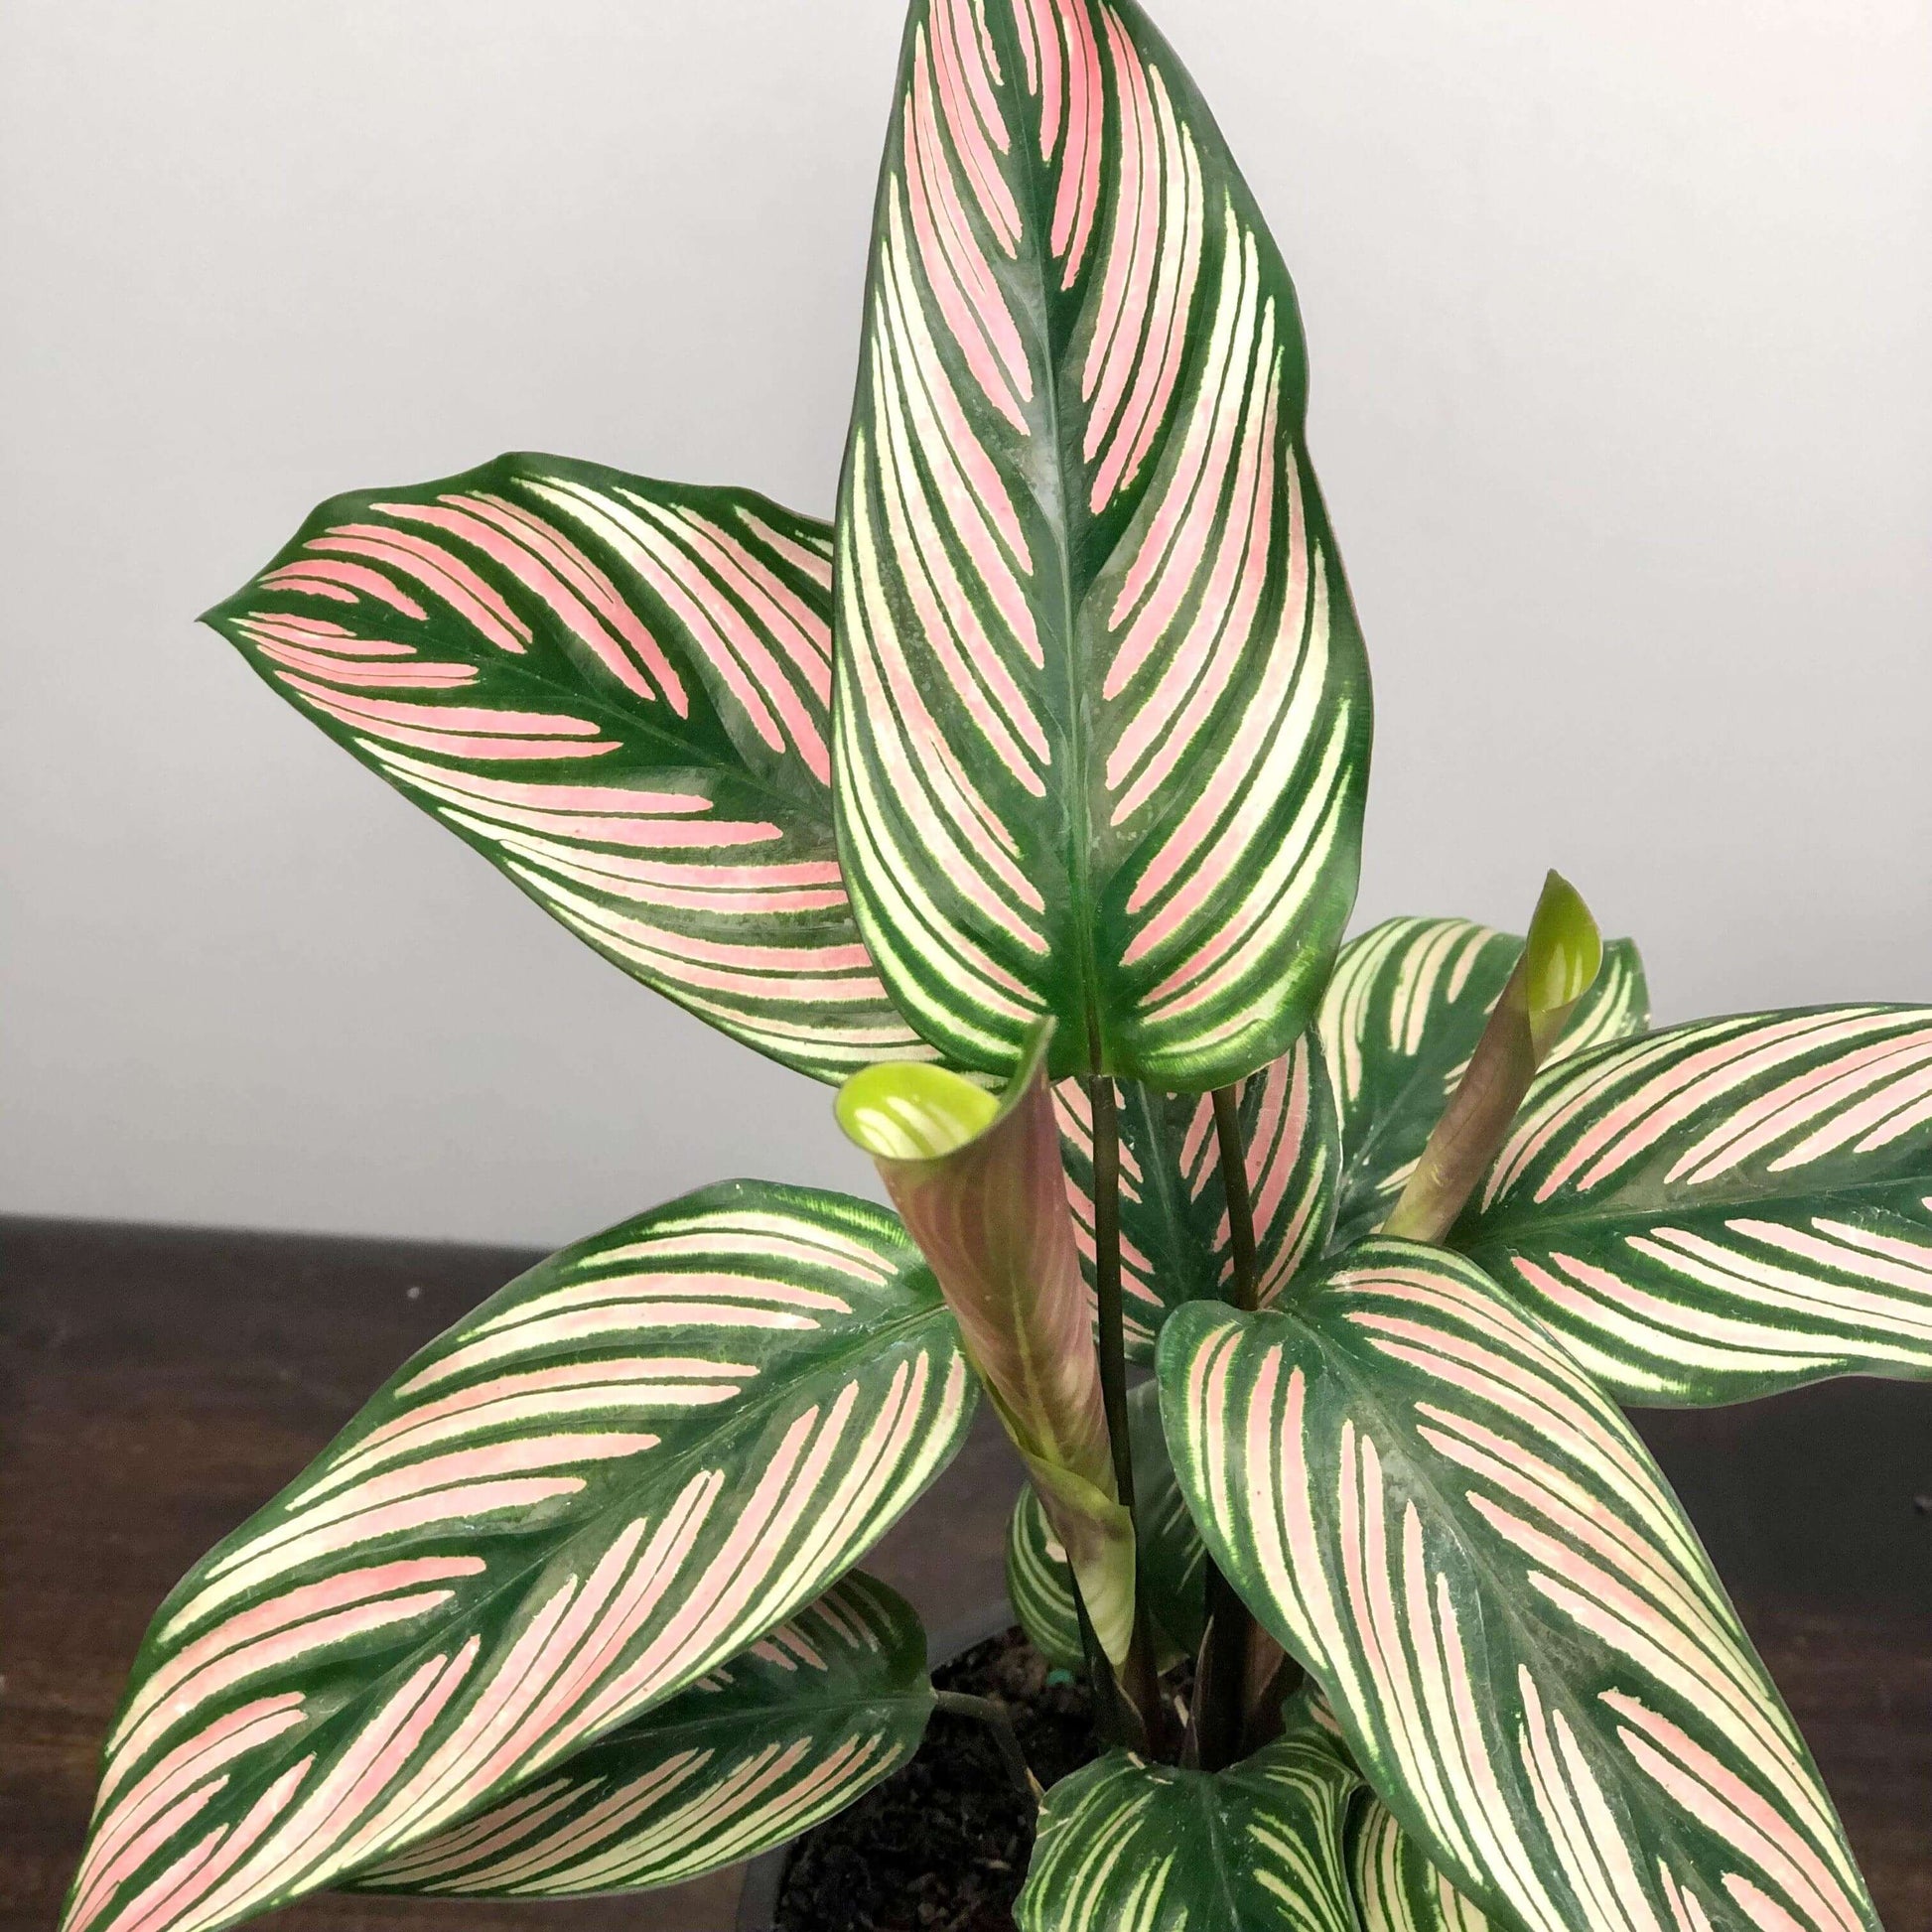 Calathea White Star Care and Information